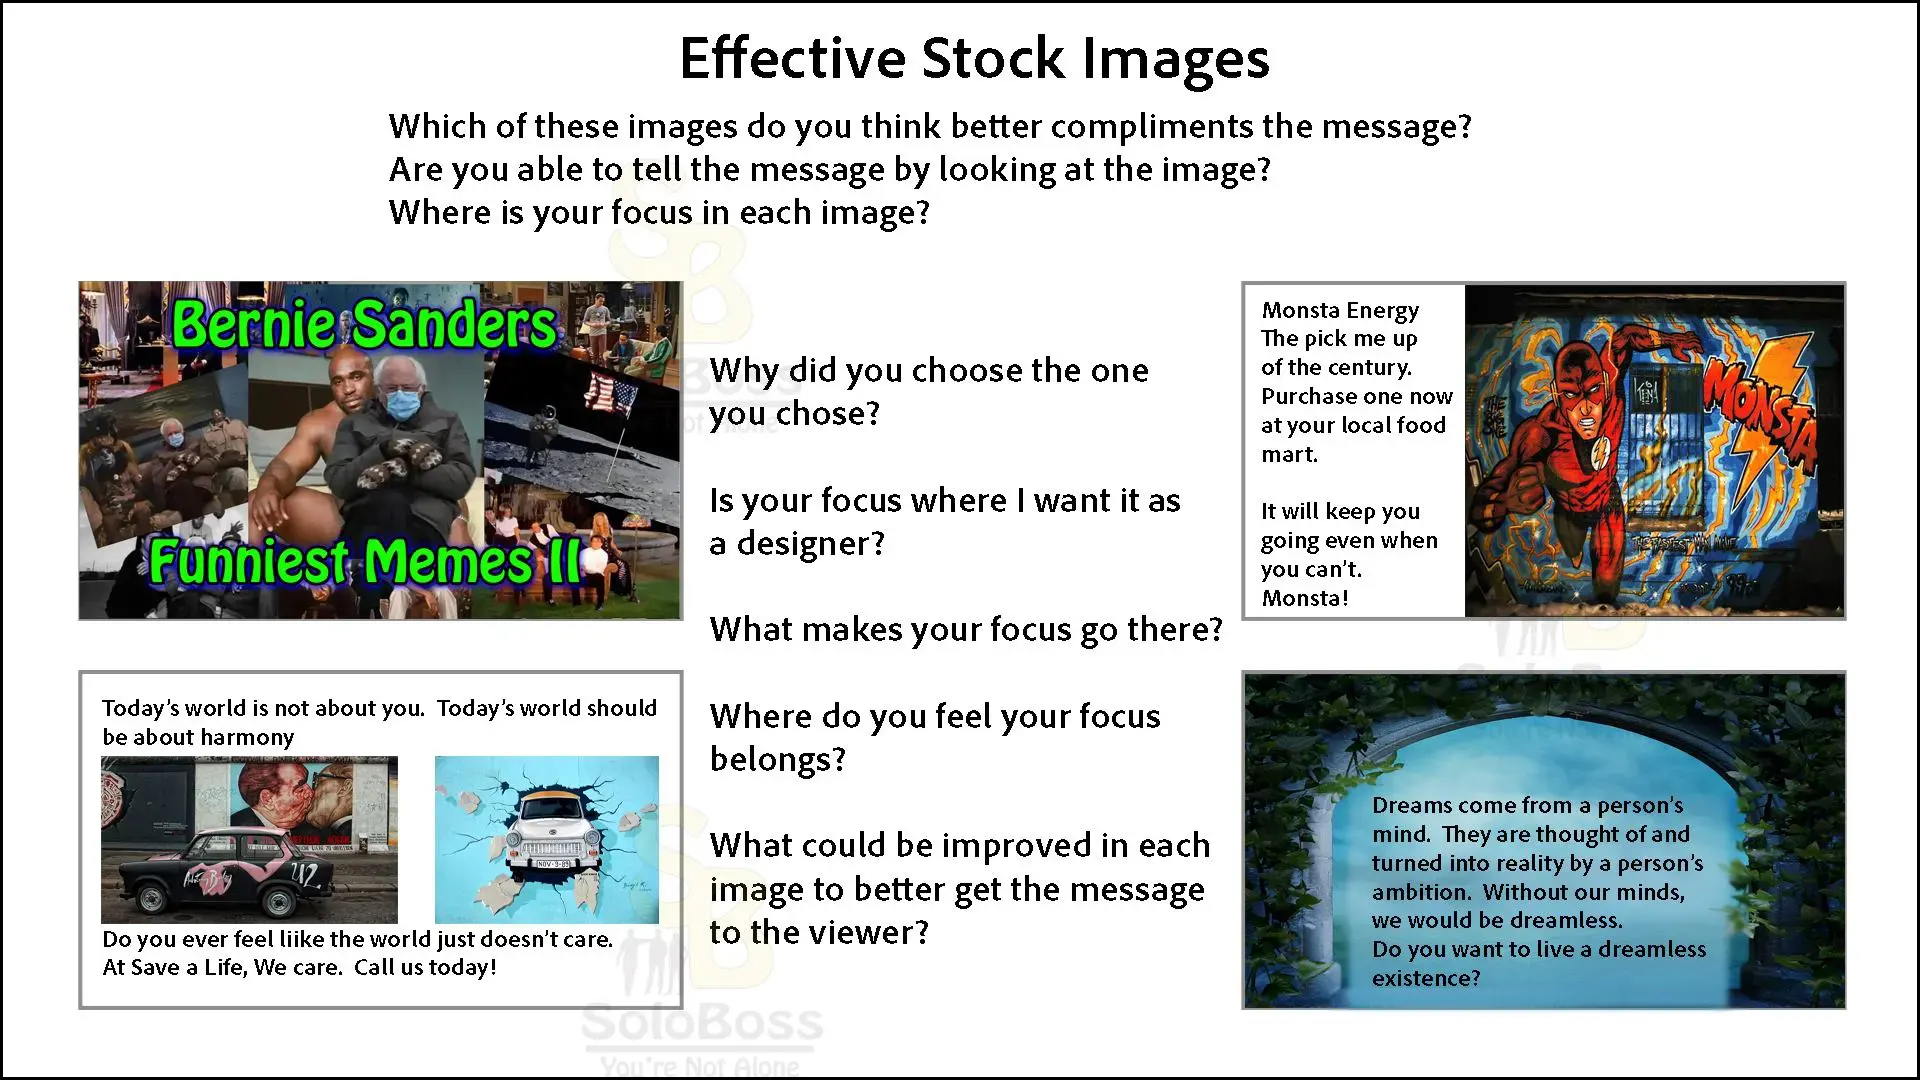 Showing good and bad uses of stock images in Doodly video design.